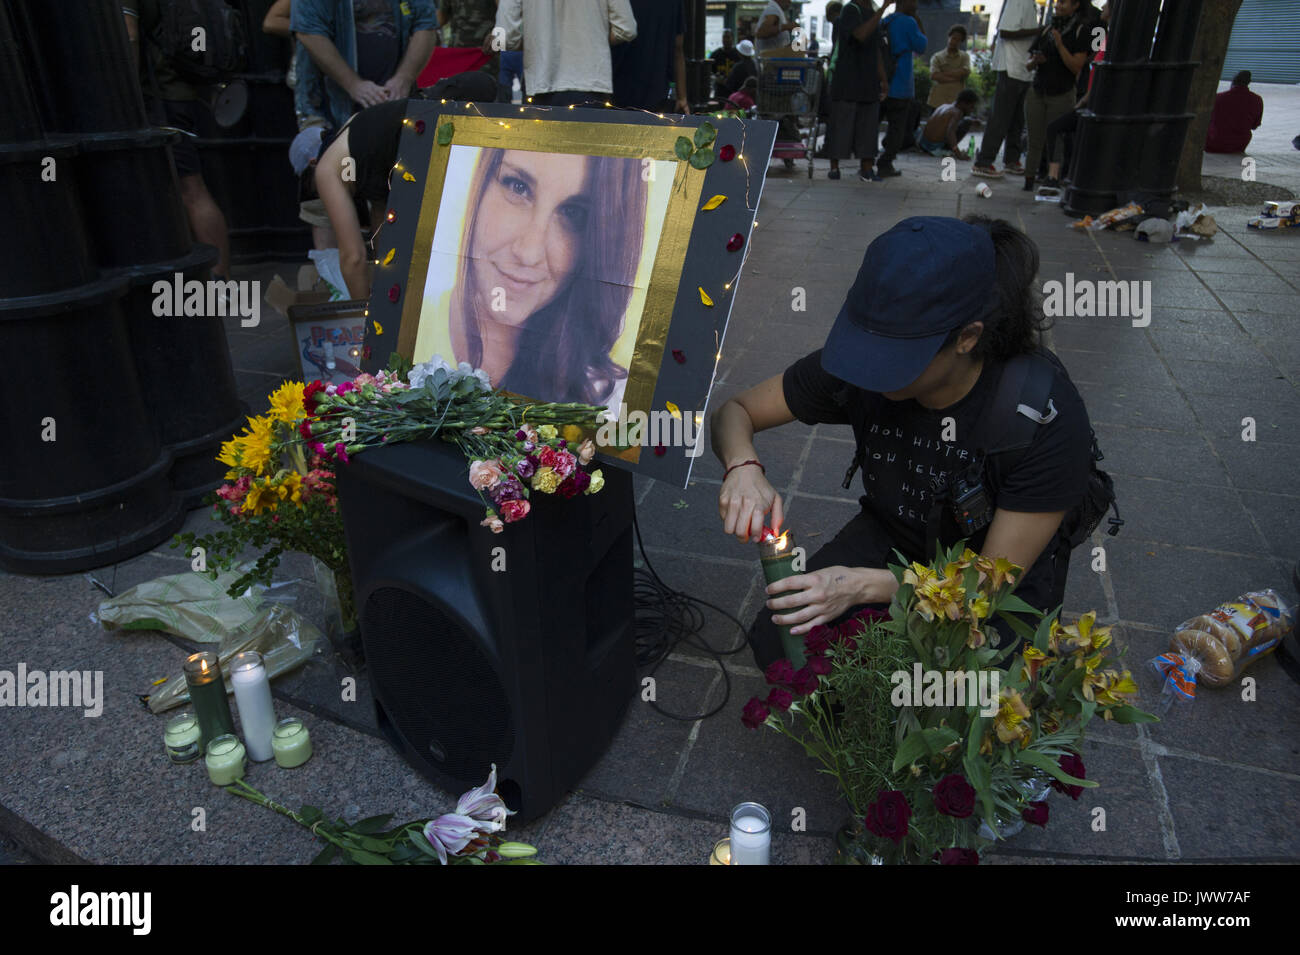 Atlanta, GA, USA. 13th Aug, 2017. Anti-Fascist protestors gather in downtown Atlanta and march along Peachtree Street, showing their support of those who demonstrated against white supremacist group in Charlottesville, VA. Rally organized by Antifa, an organization nationally that fights fascism.Pictured: Portrait of Charlottesville victim Heather Heyer at impromptu memorial Credit: Robin Rayne Nelson/ZUMA Wire/Alamy Live News Stock Photo